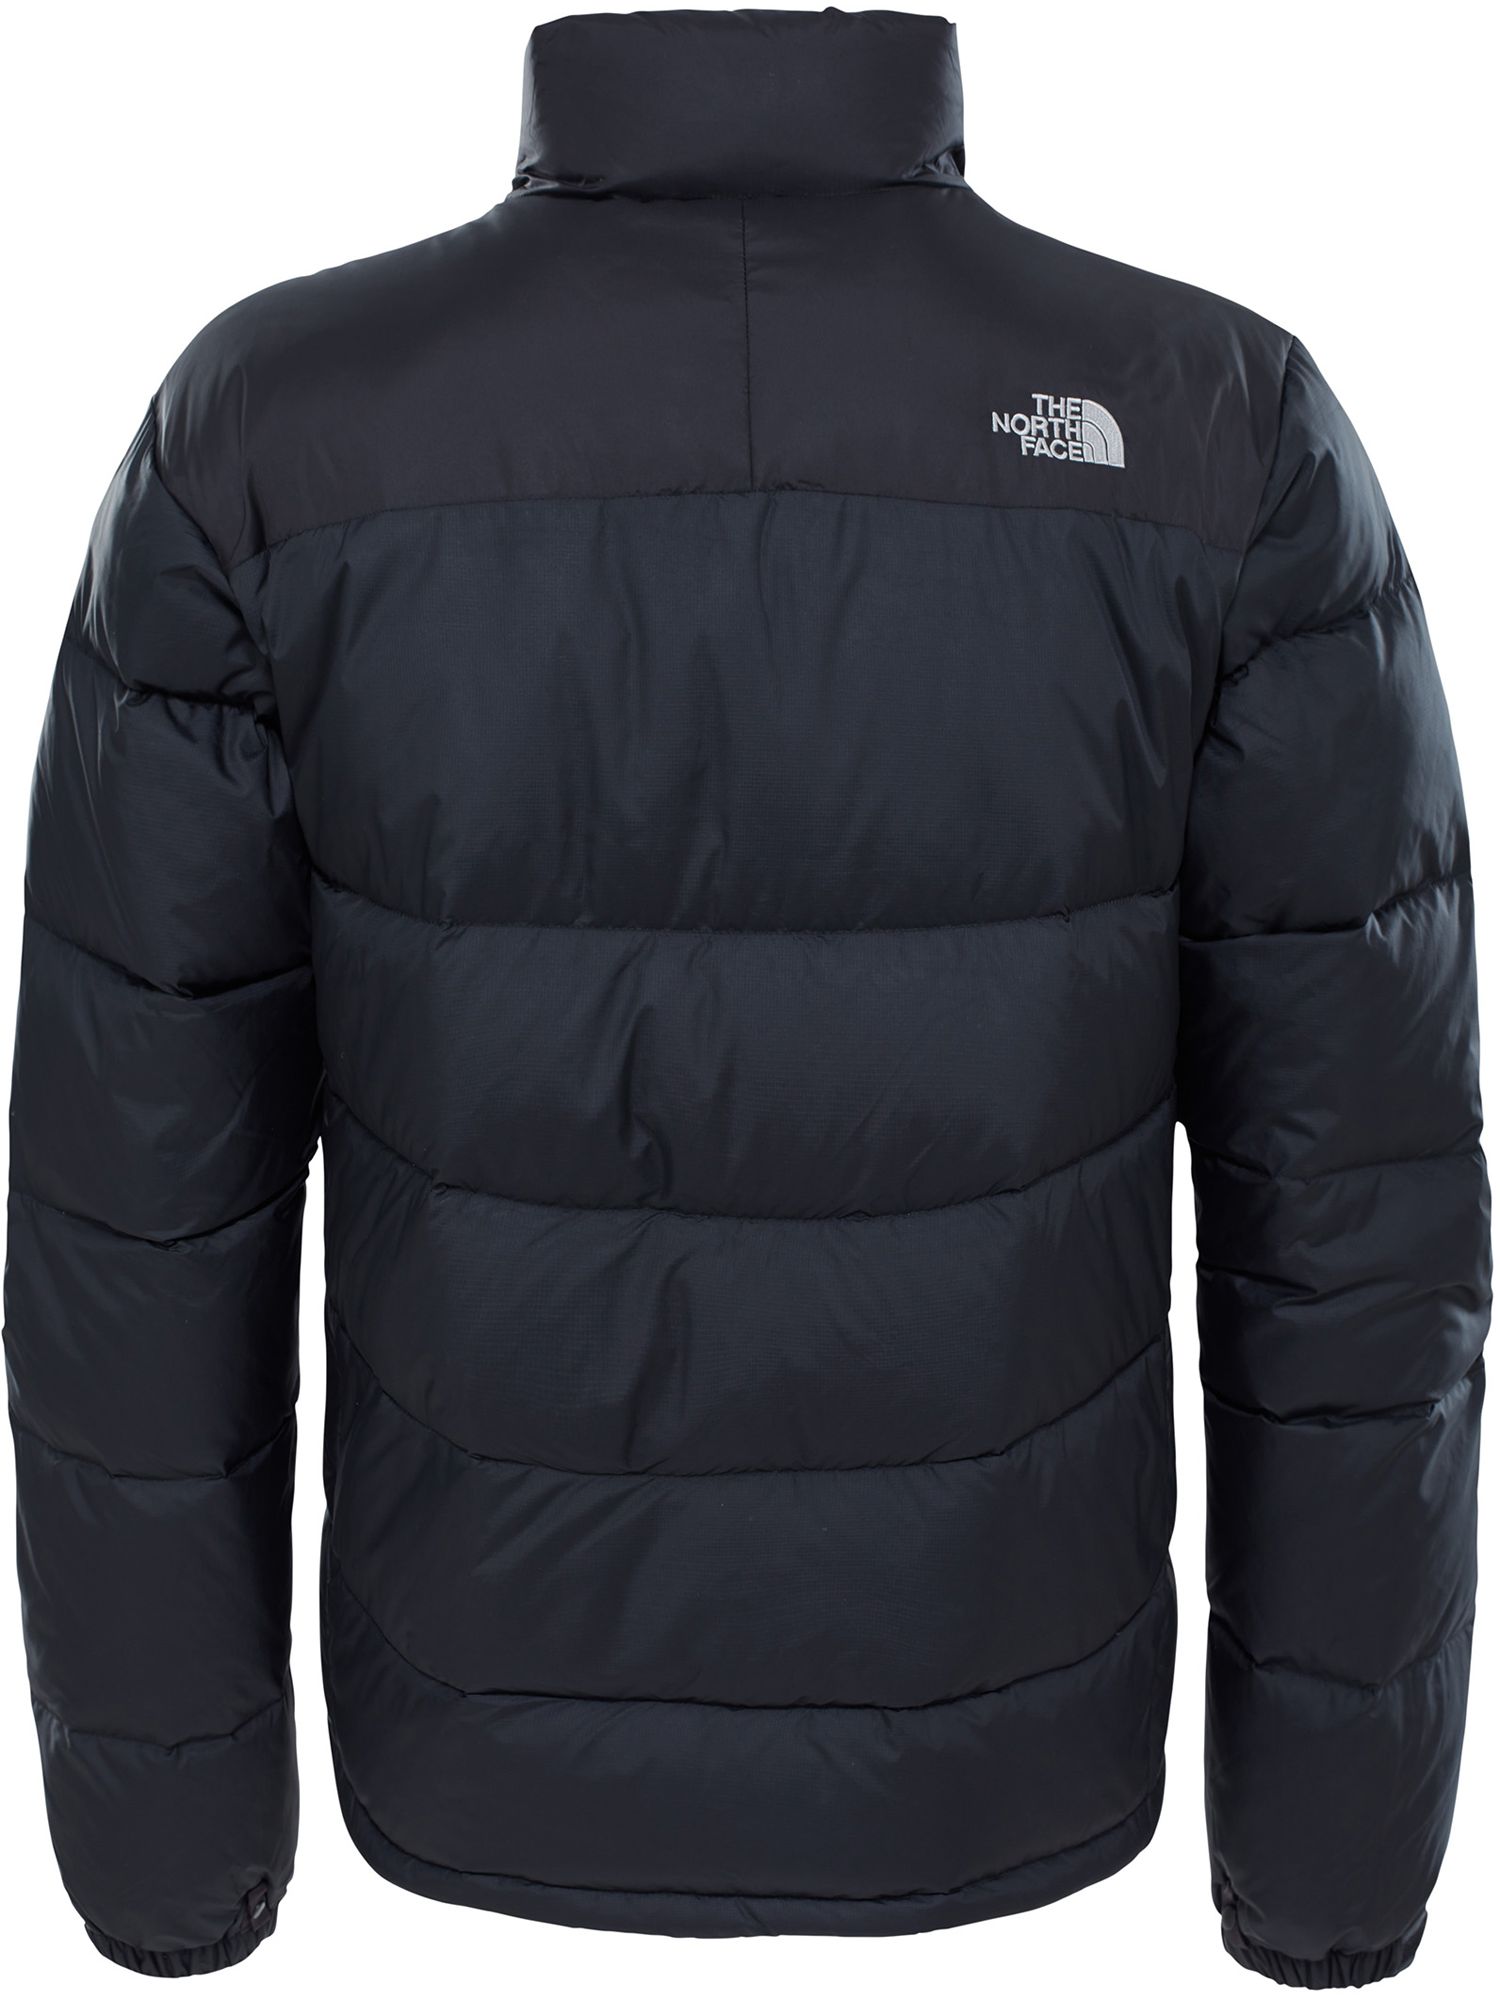 north face puffer mens jacket